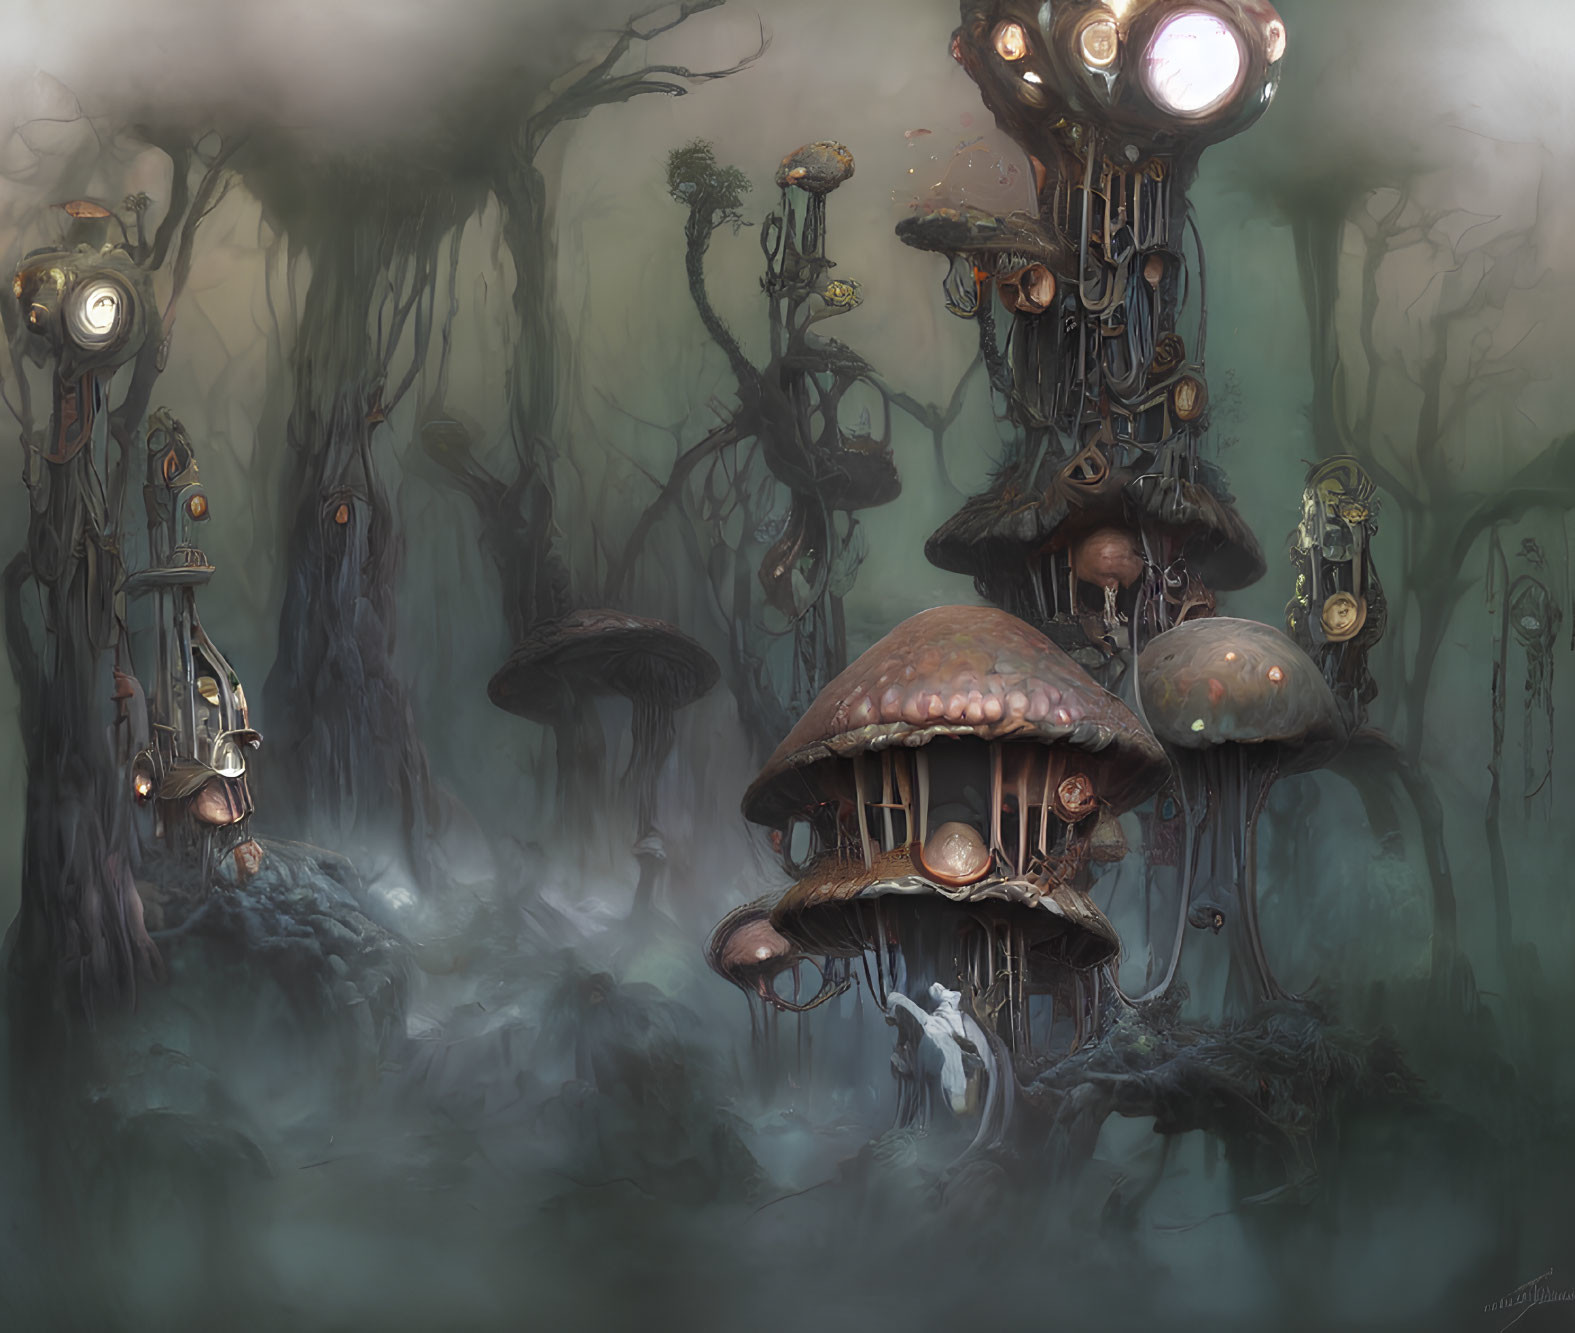 Fantastical misty landscape with mushroom houses and anthropomorphic trees.